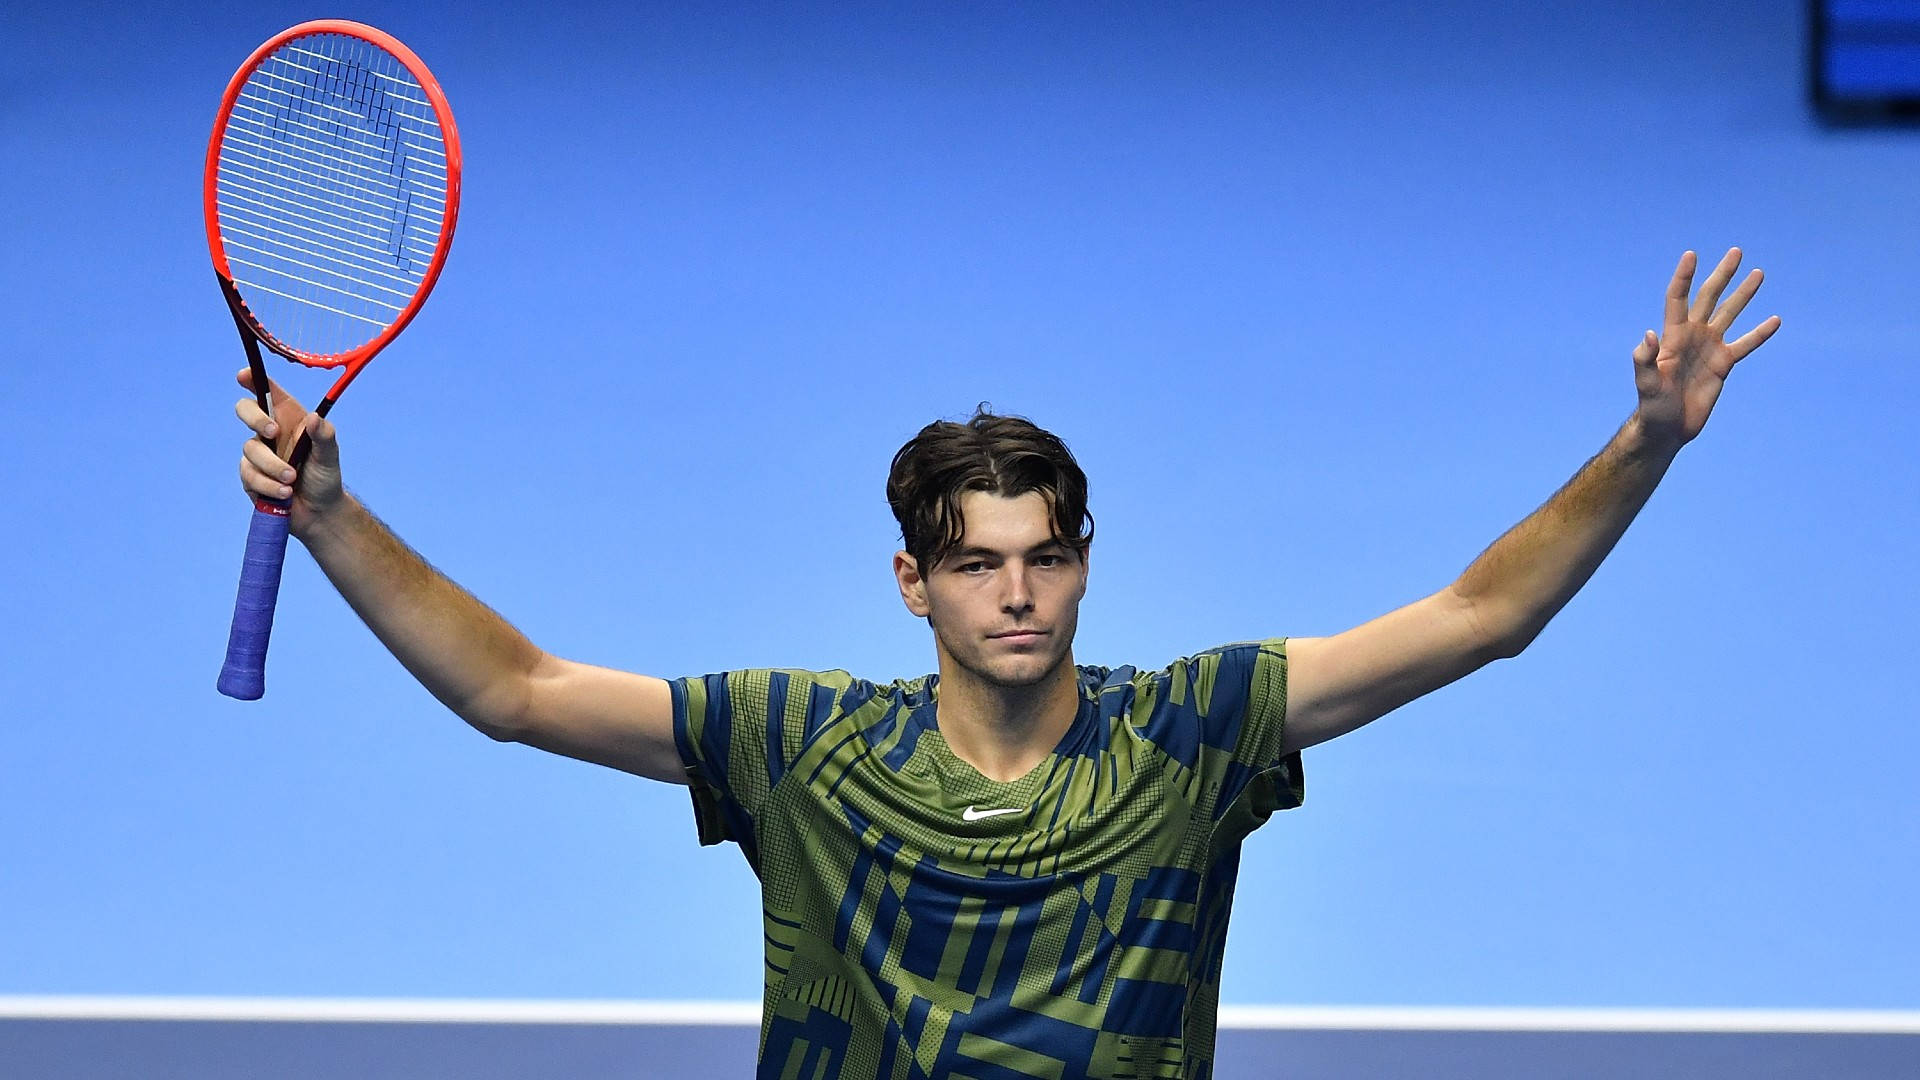 Thrilling Victory - Taylor Fritz Celebrating Success